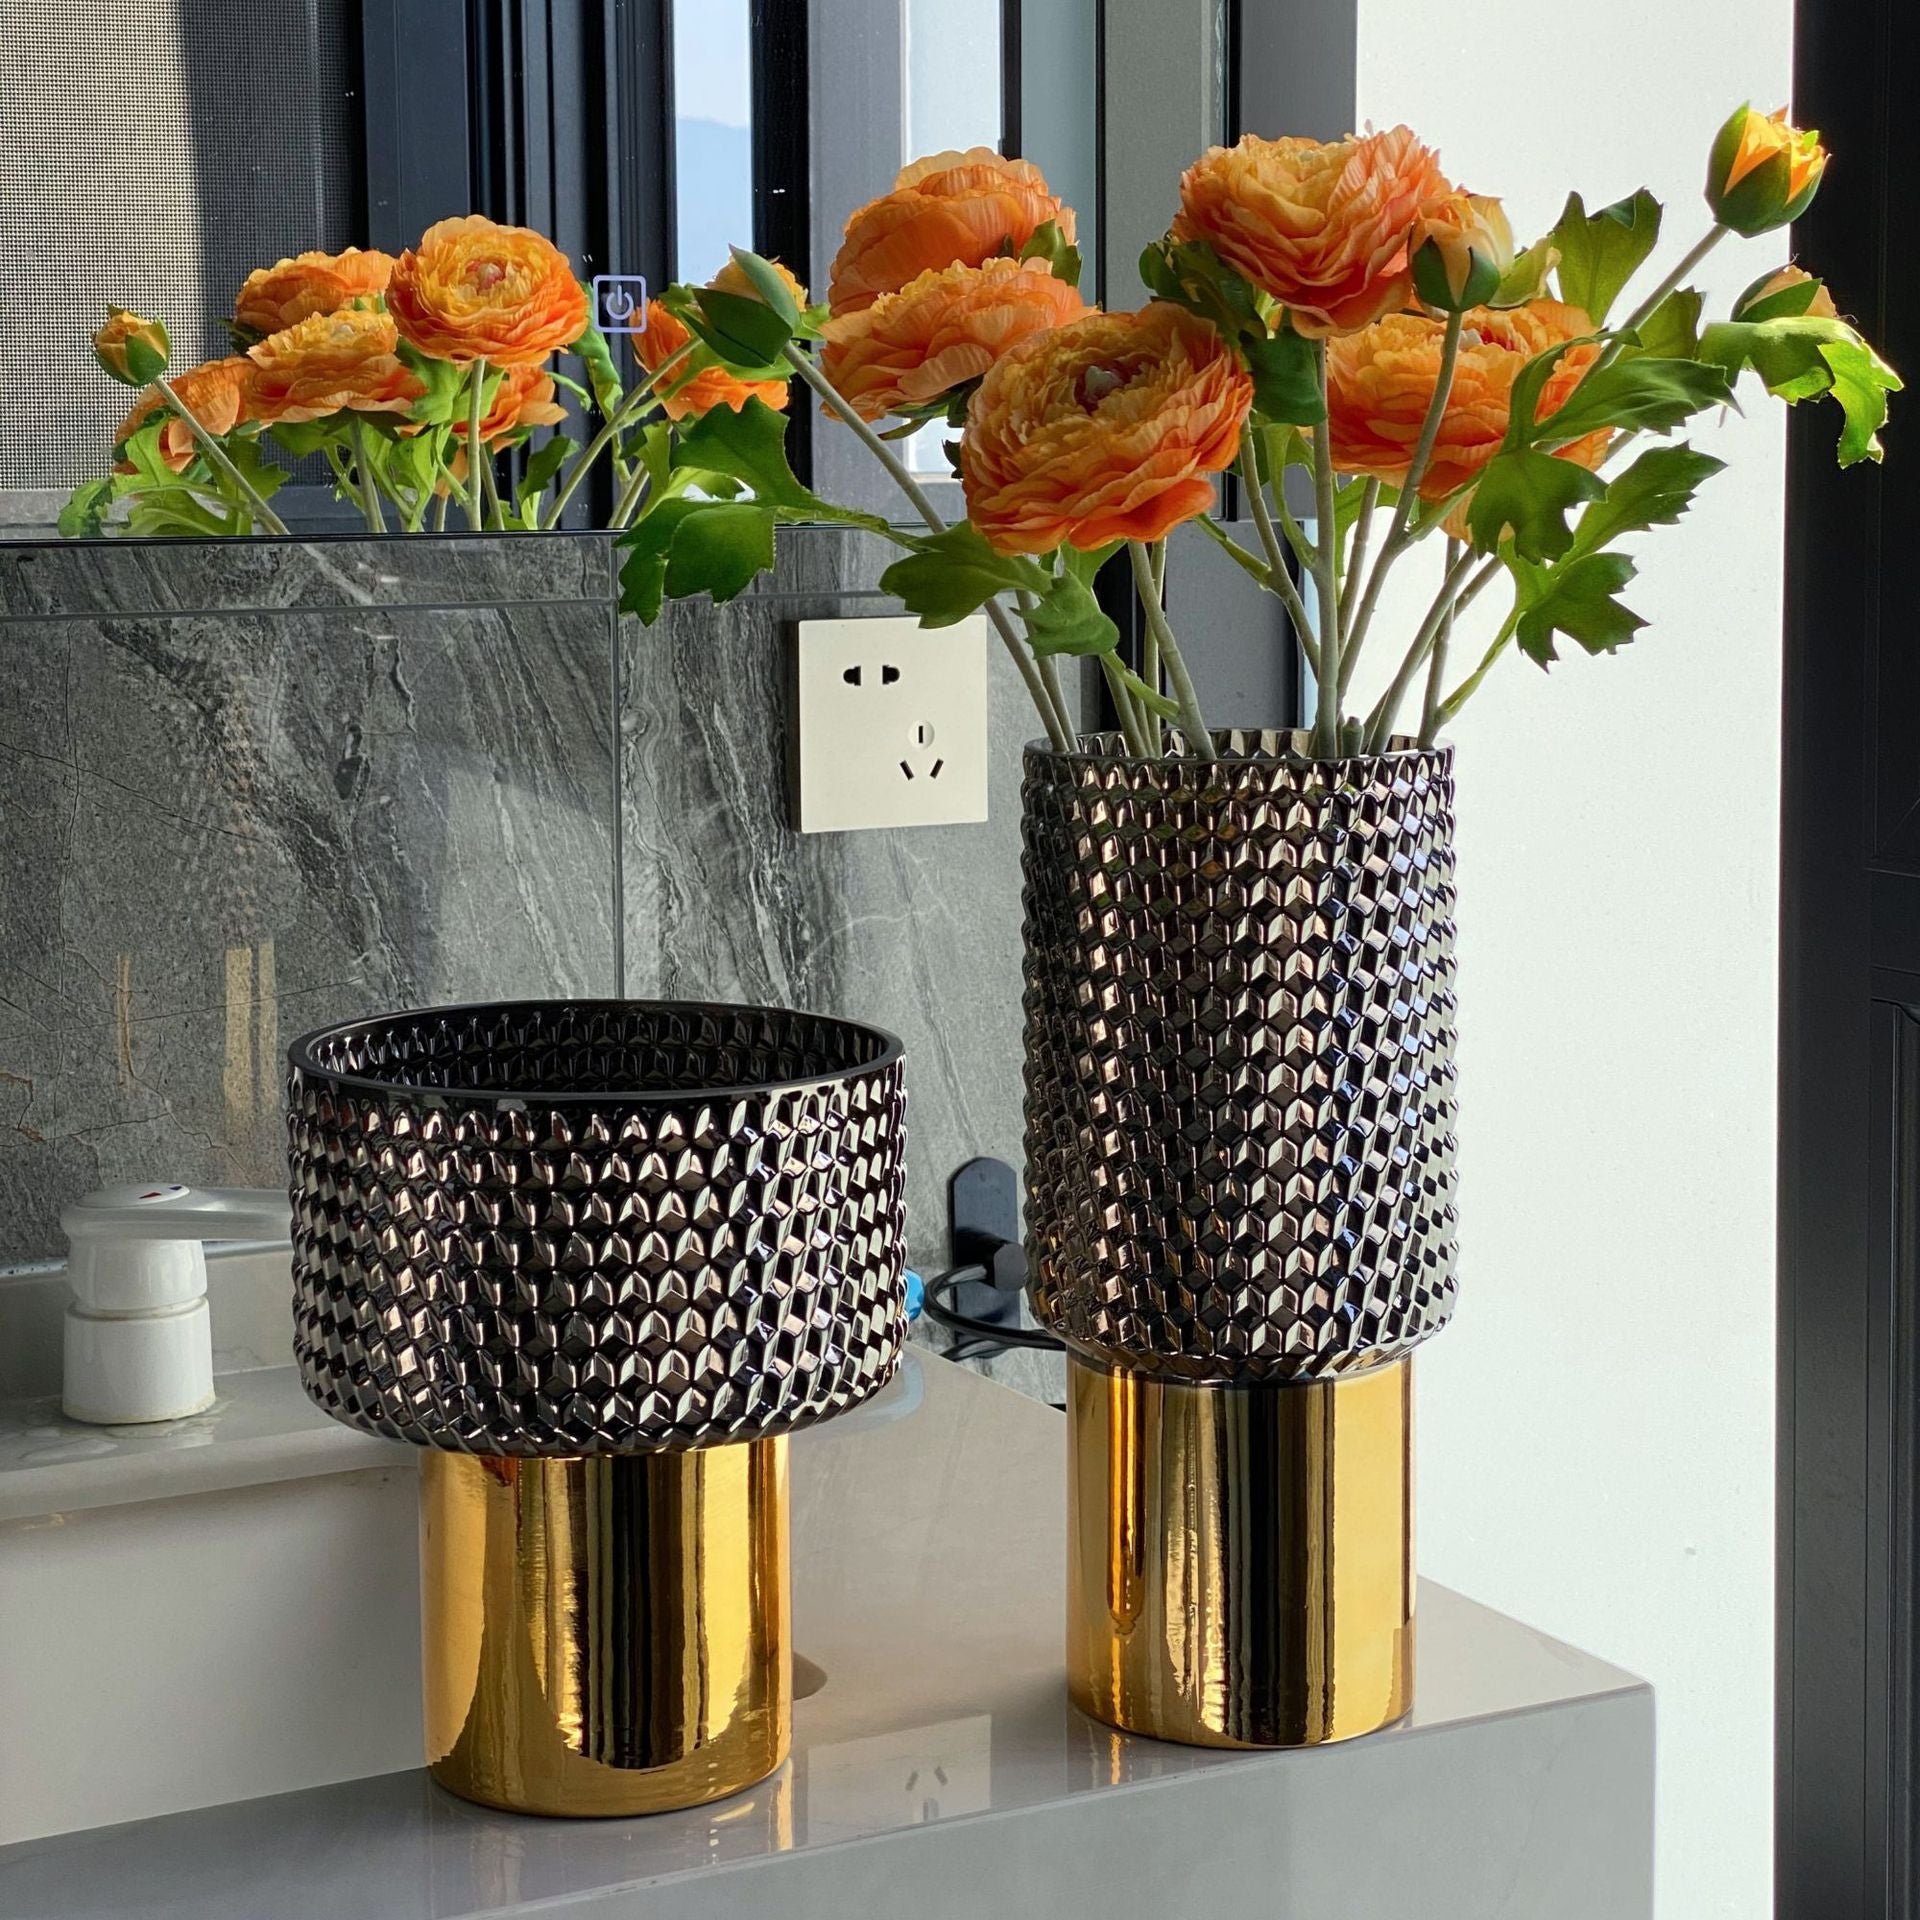 European Style Light Luxury Electroplated Golden Glass Vase Decoration - Max&Mark Home Decor